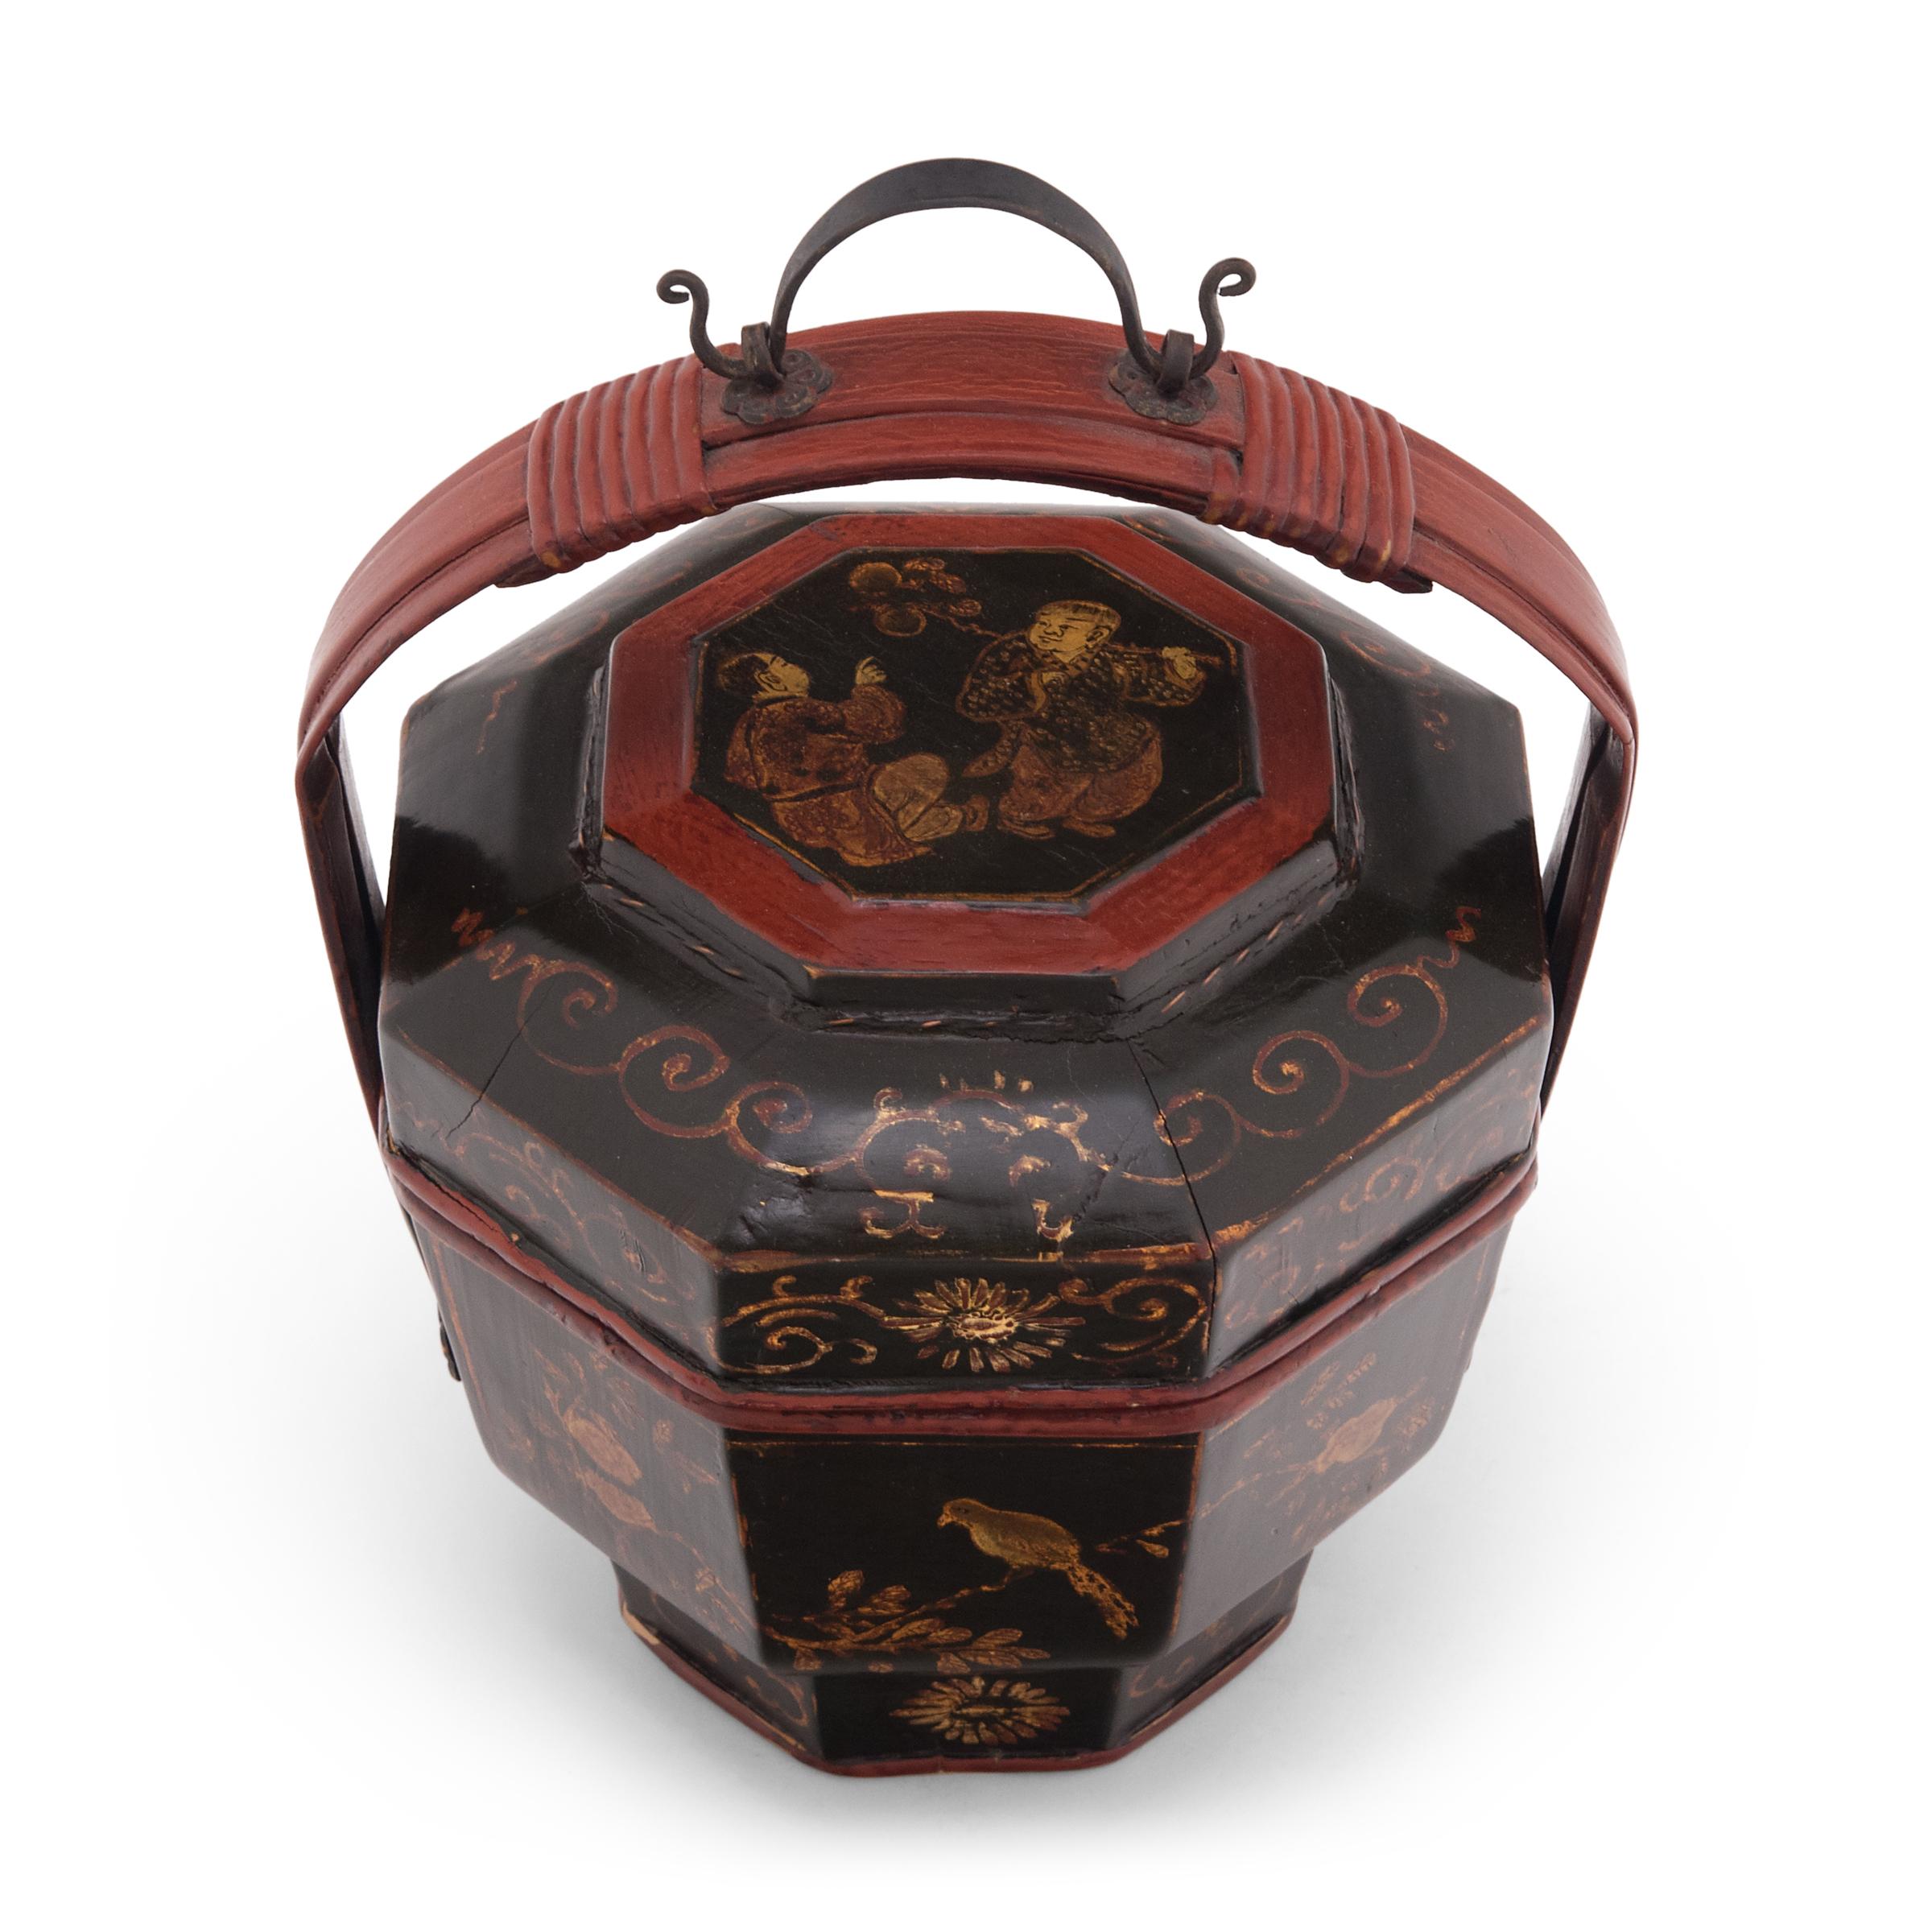 Wood Chinese Gilt Black Lacquer Carrying Box, c. 1900